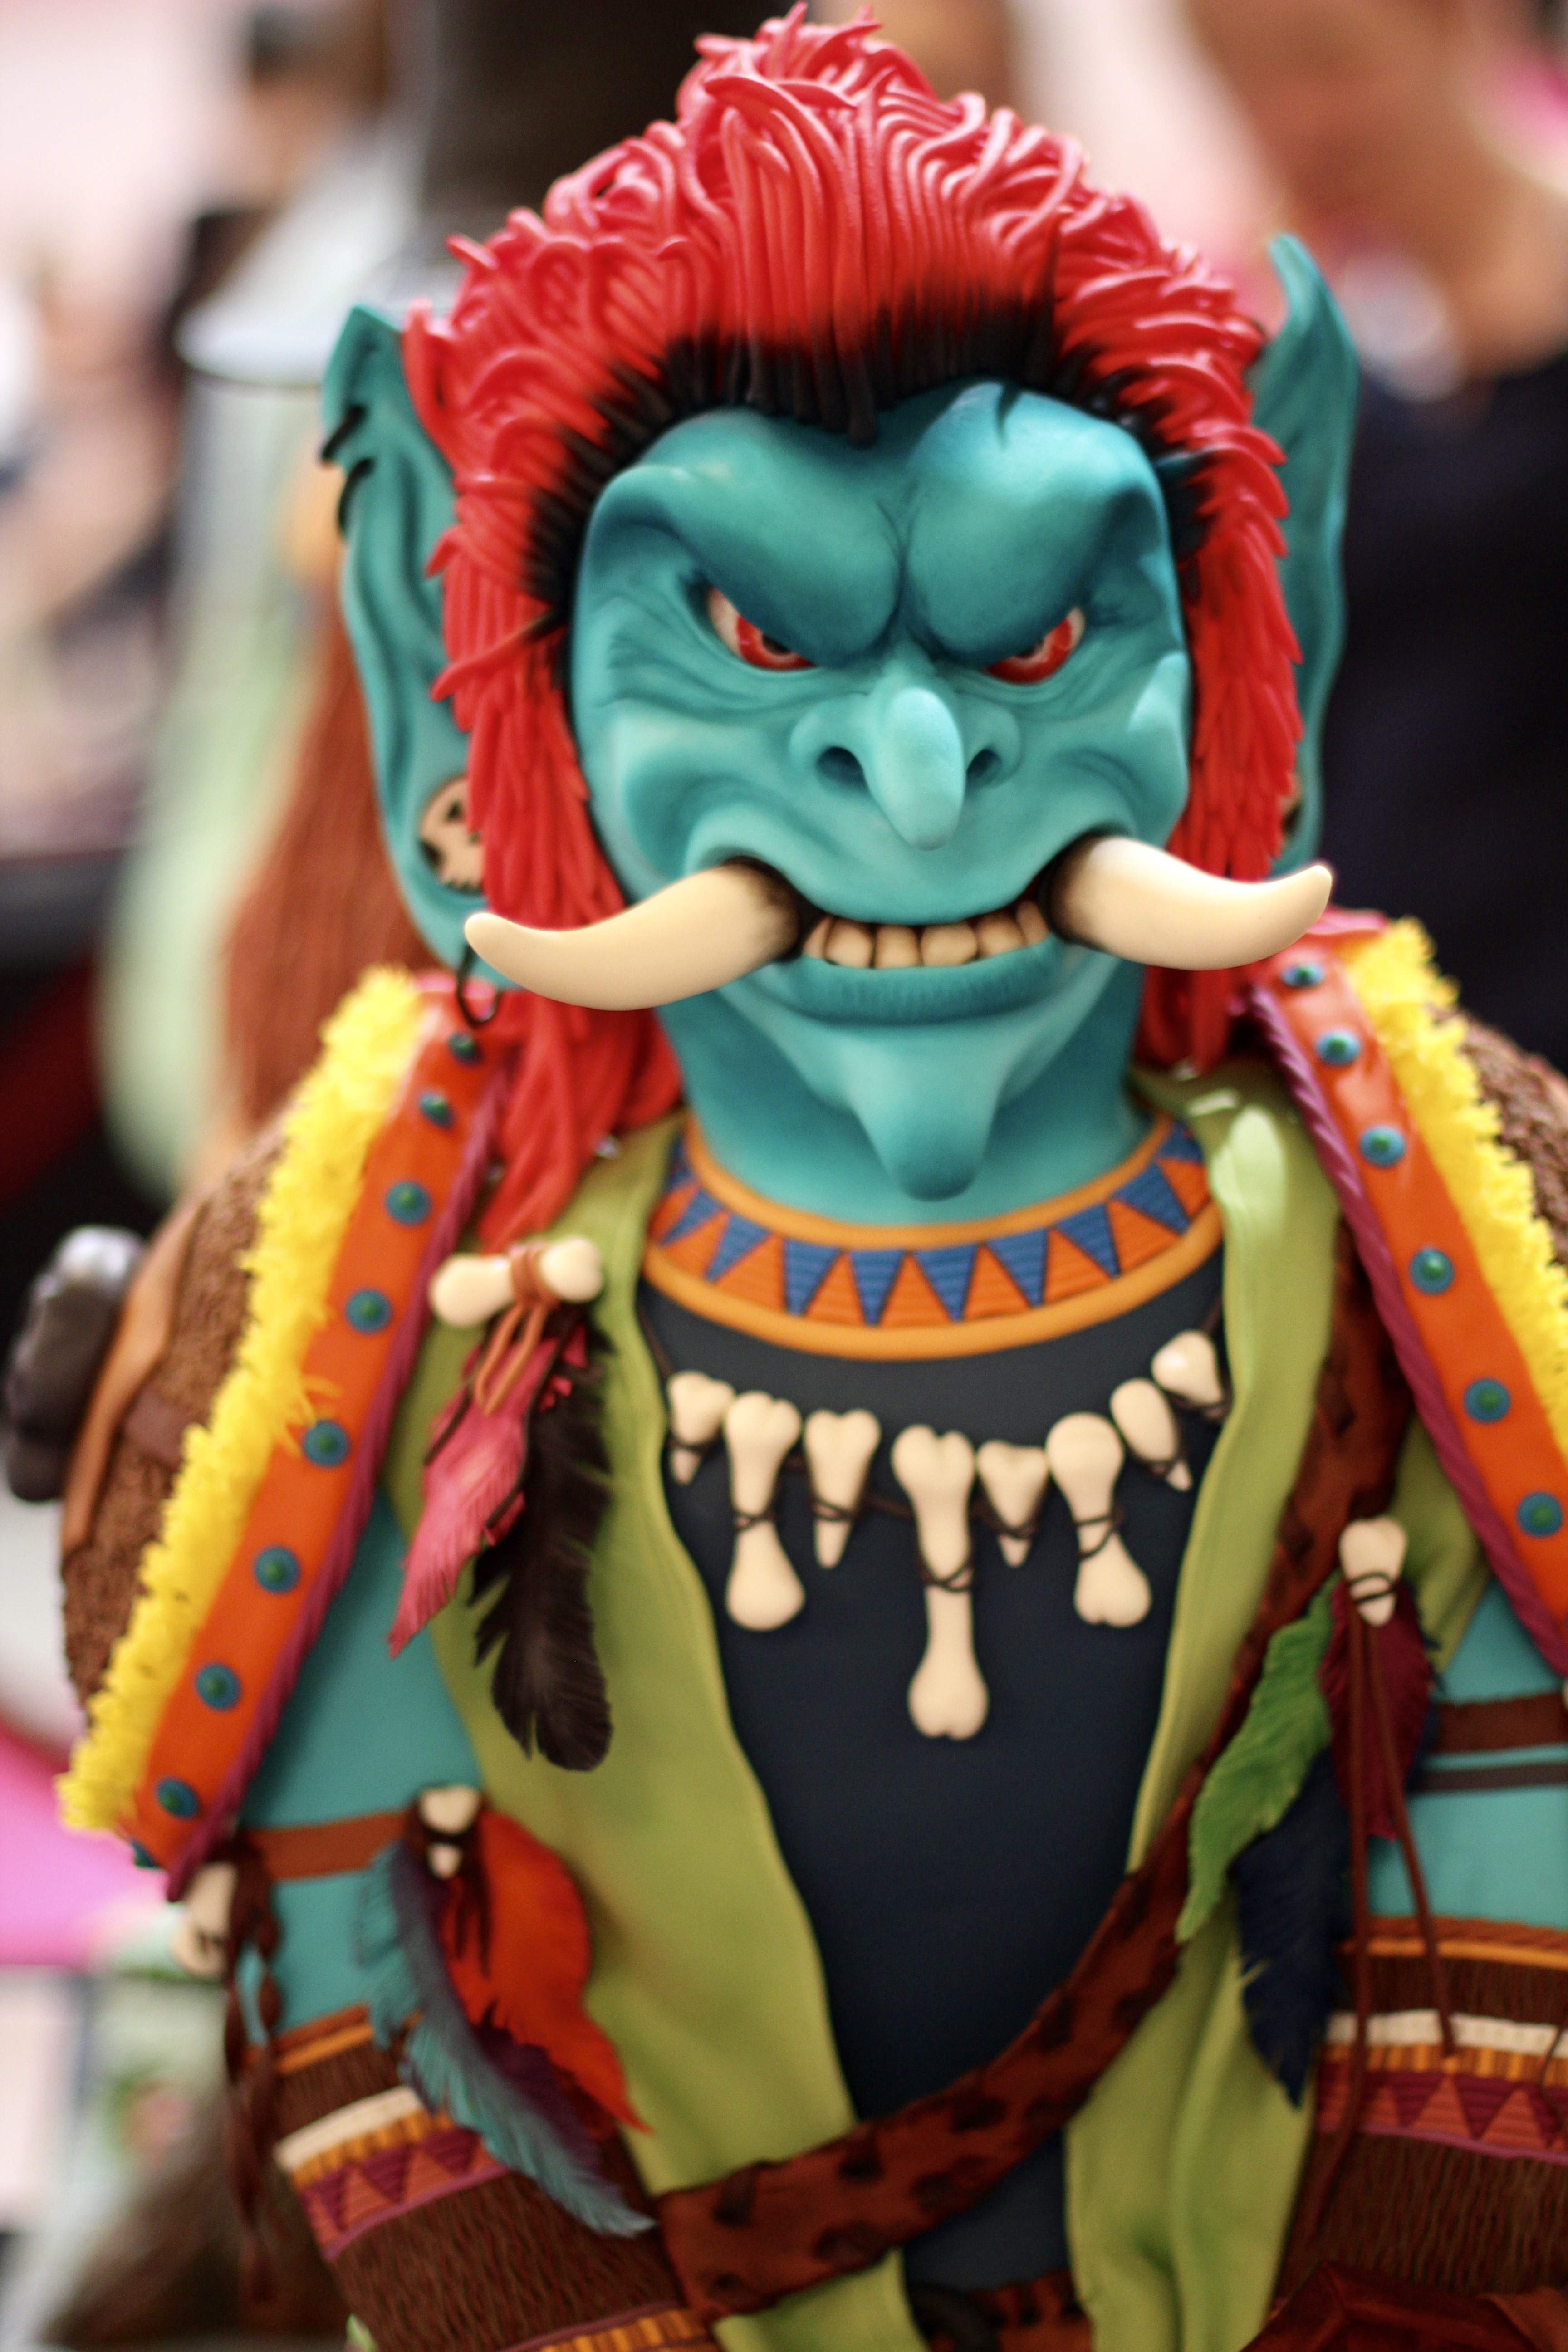 blue and red oni figurine